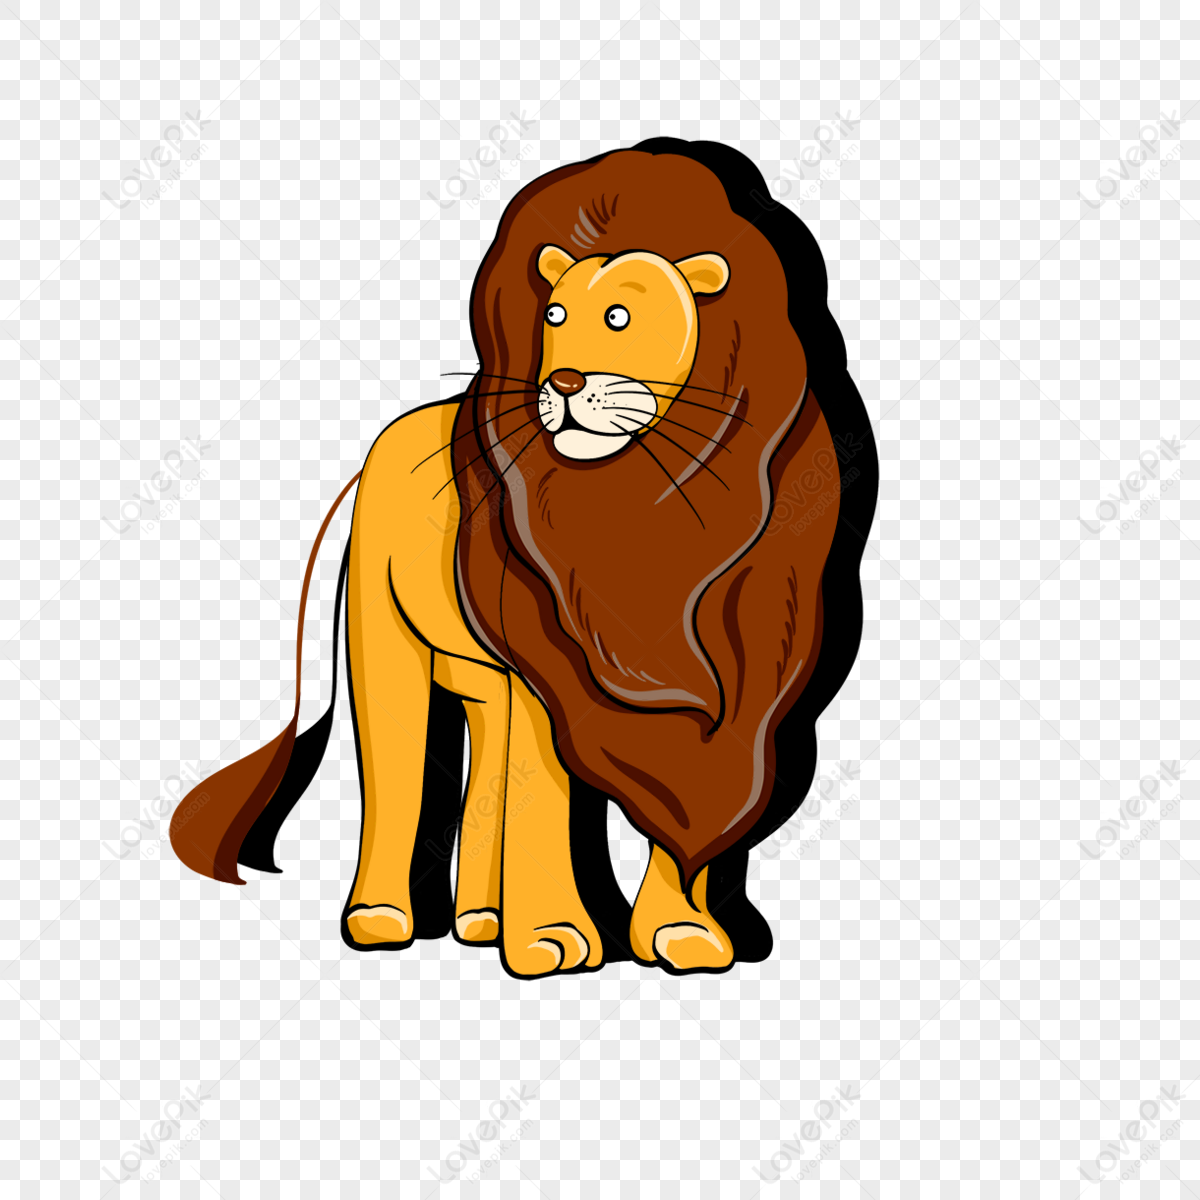 Cartoon Sticker Lion Clipart,animal,forest,animal World PNG Free ...